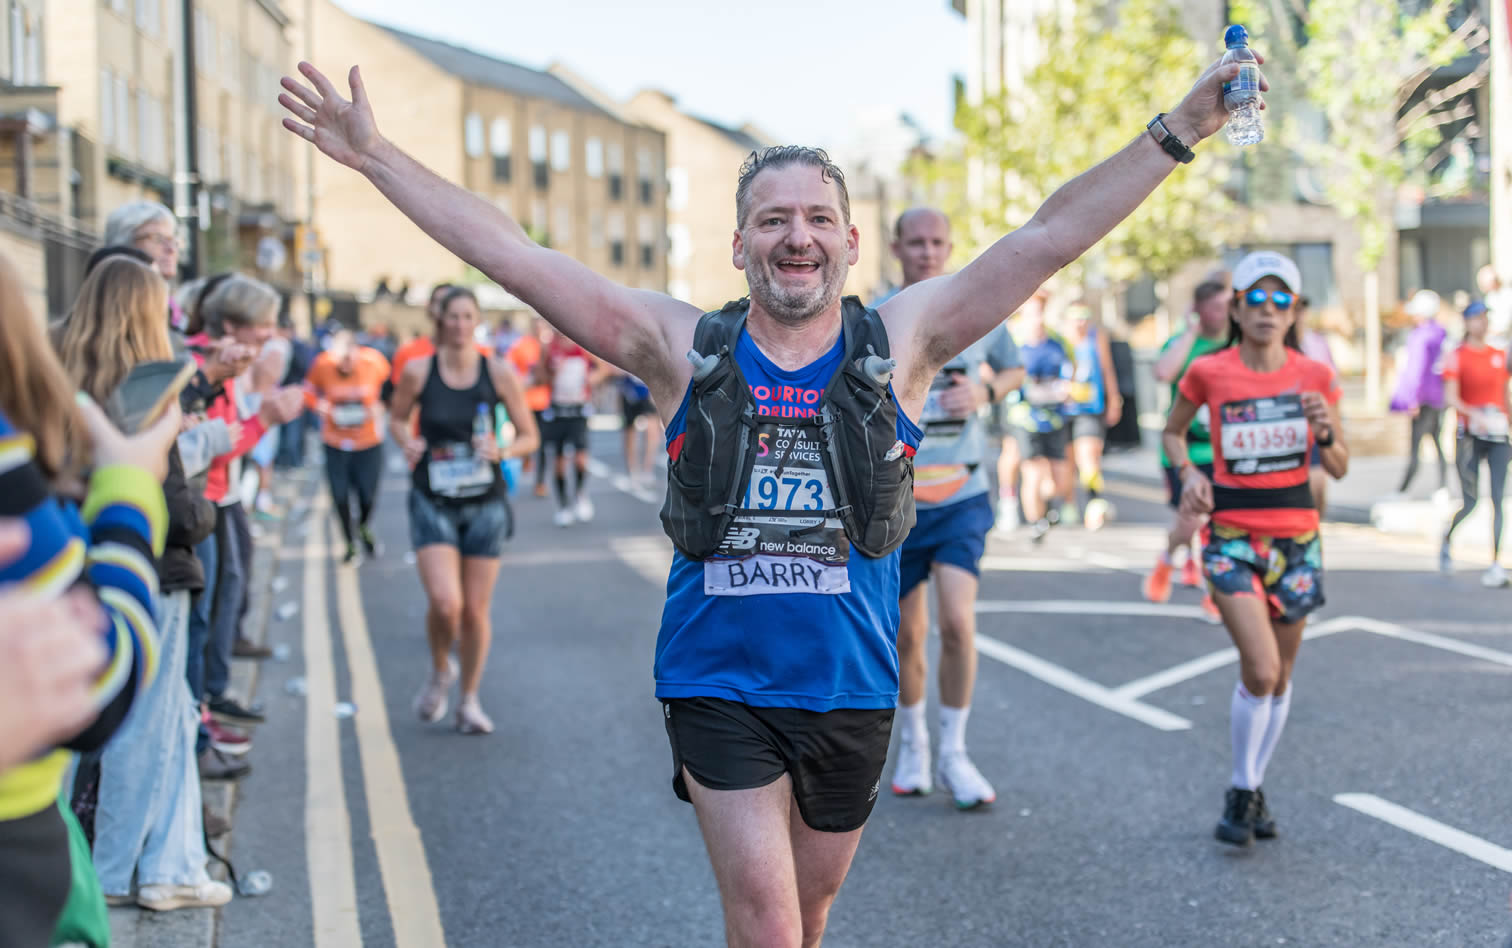 Bourton's Barry O'Leary at London Marathon - 2nd October 2022